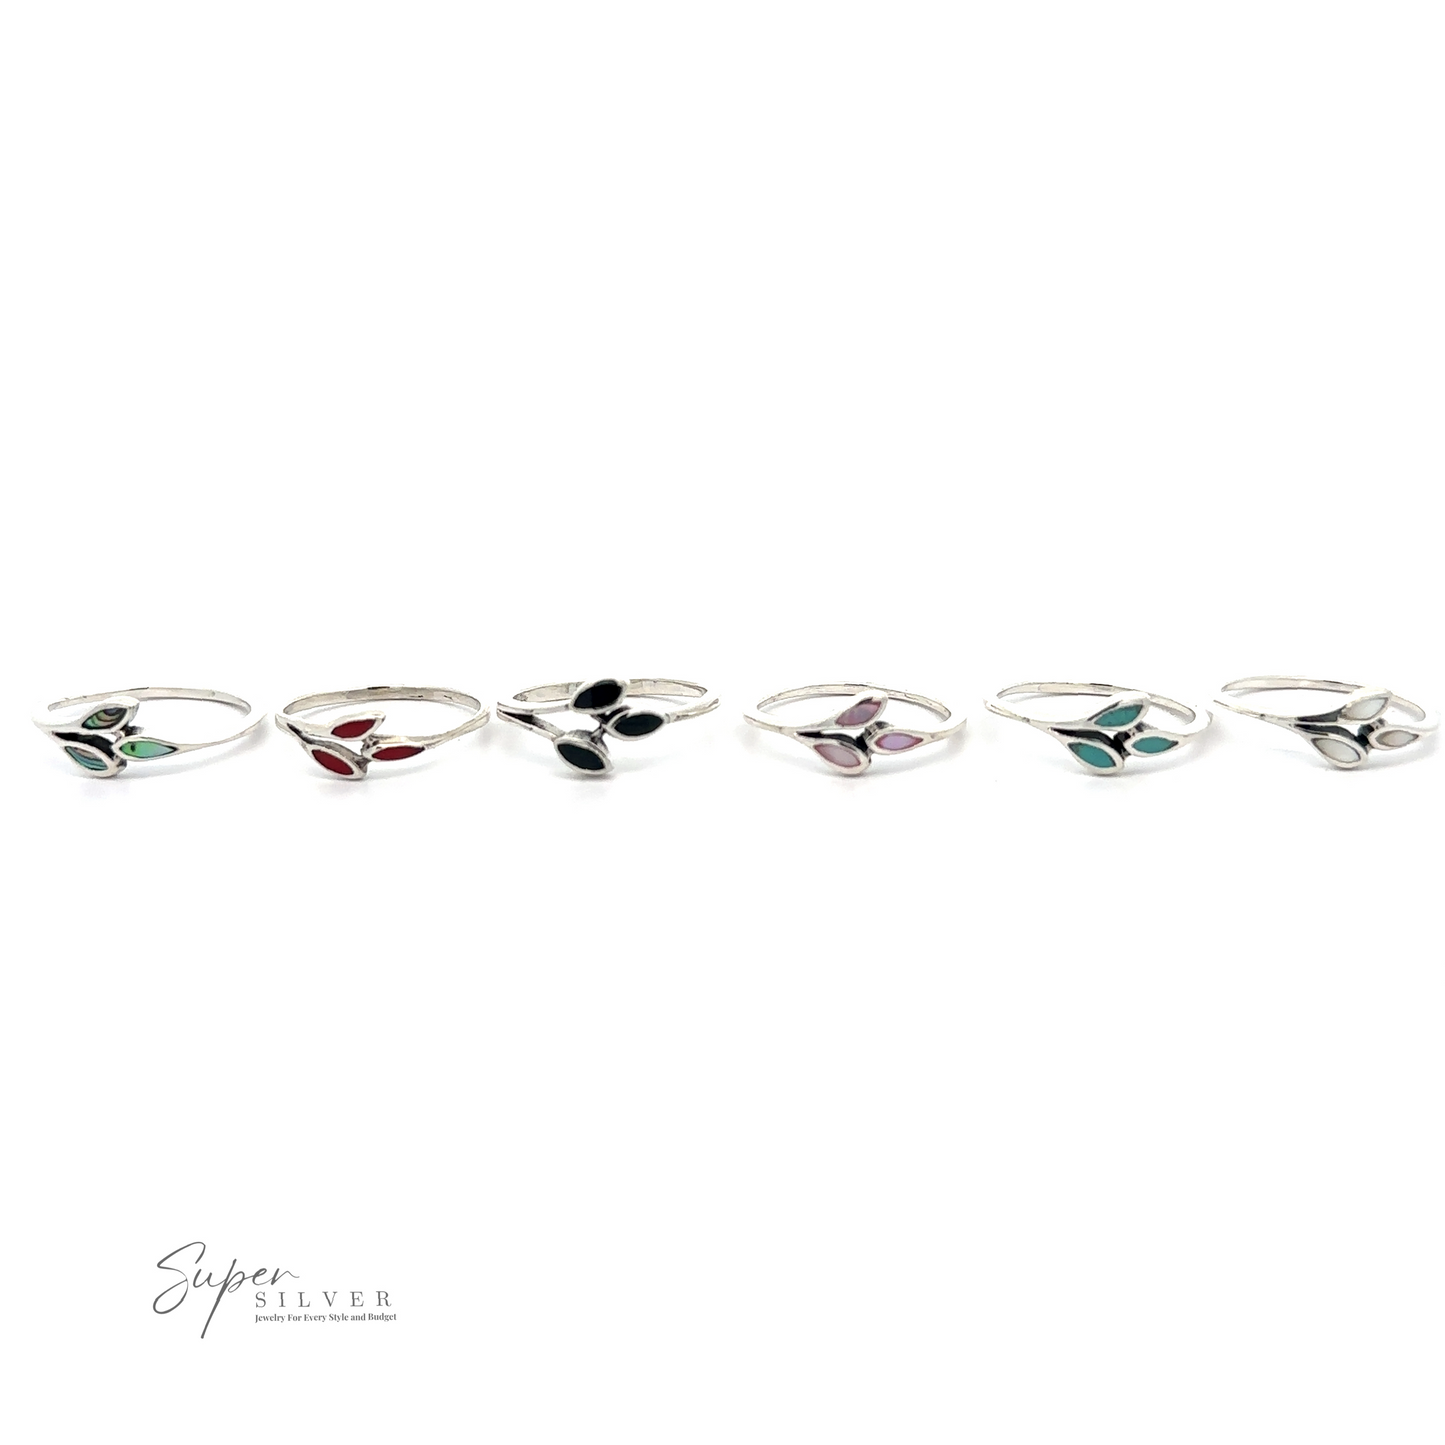 
                  
                    Six Tiny Leaves Rings with Inlaid Stones arranged in a line. The stones are set in pairs and appear in different colors: green, red, black, purple, blue, and green. The minimalist rings feature the logo "Super Silver.
                  
                